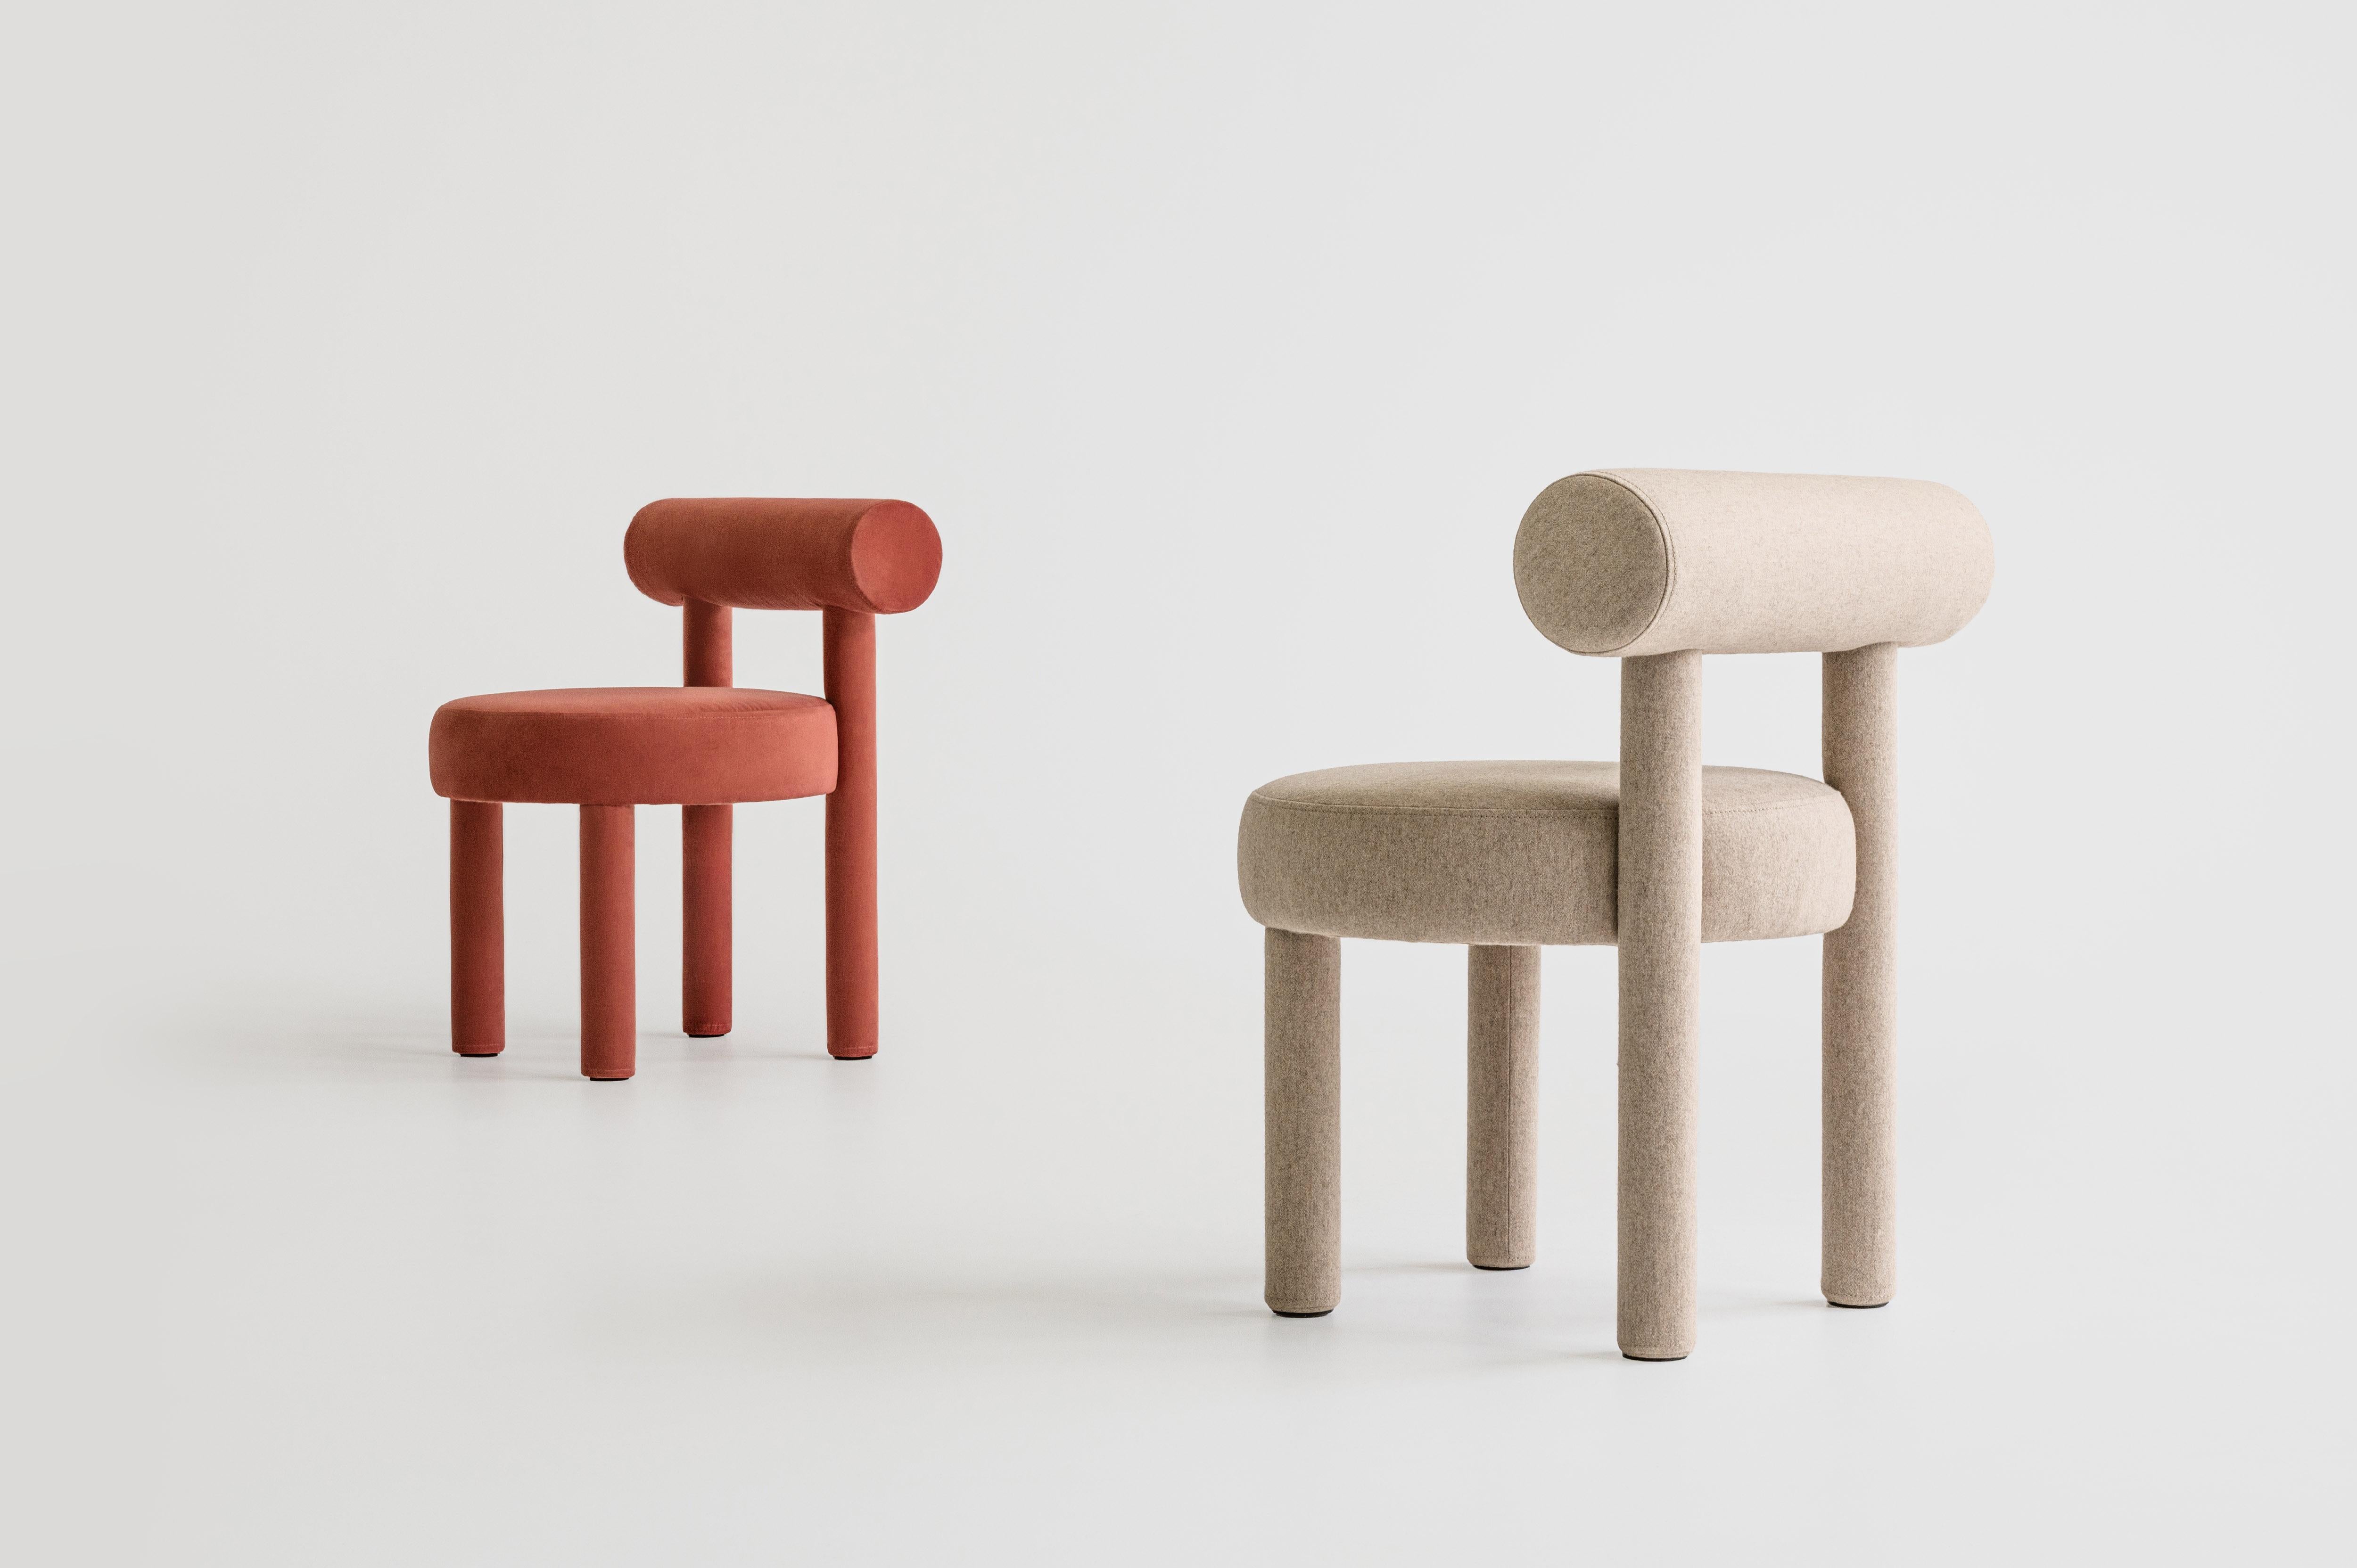 New Noom furniture collection is dedicated to the 100th anniversary of the founding of the Bauhaus School in Germany. Ideas of functionalism and conciseness, the combination of craft and art, buildings and objects formed by a composition of simple